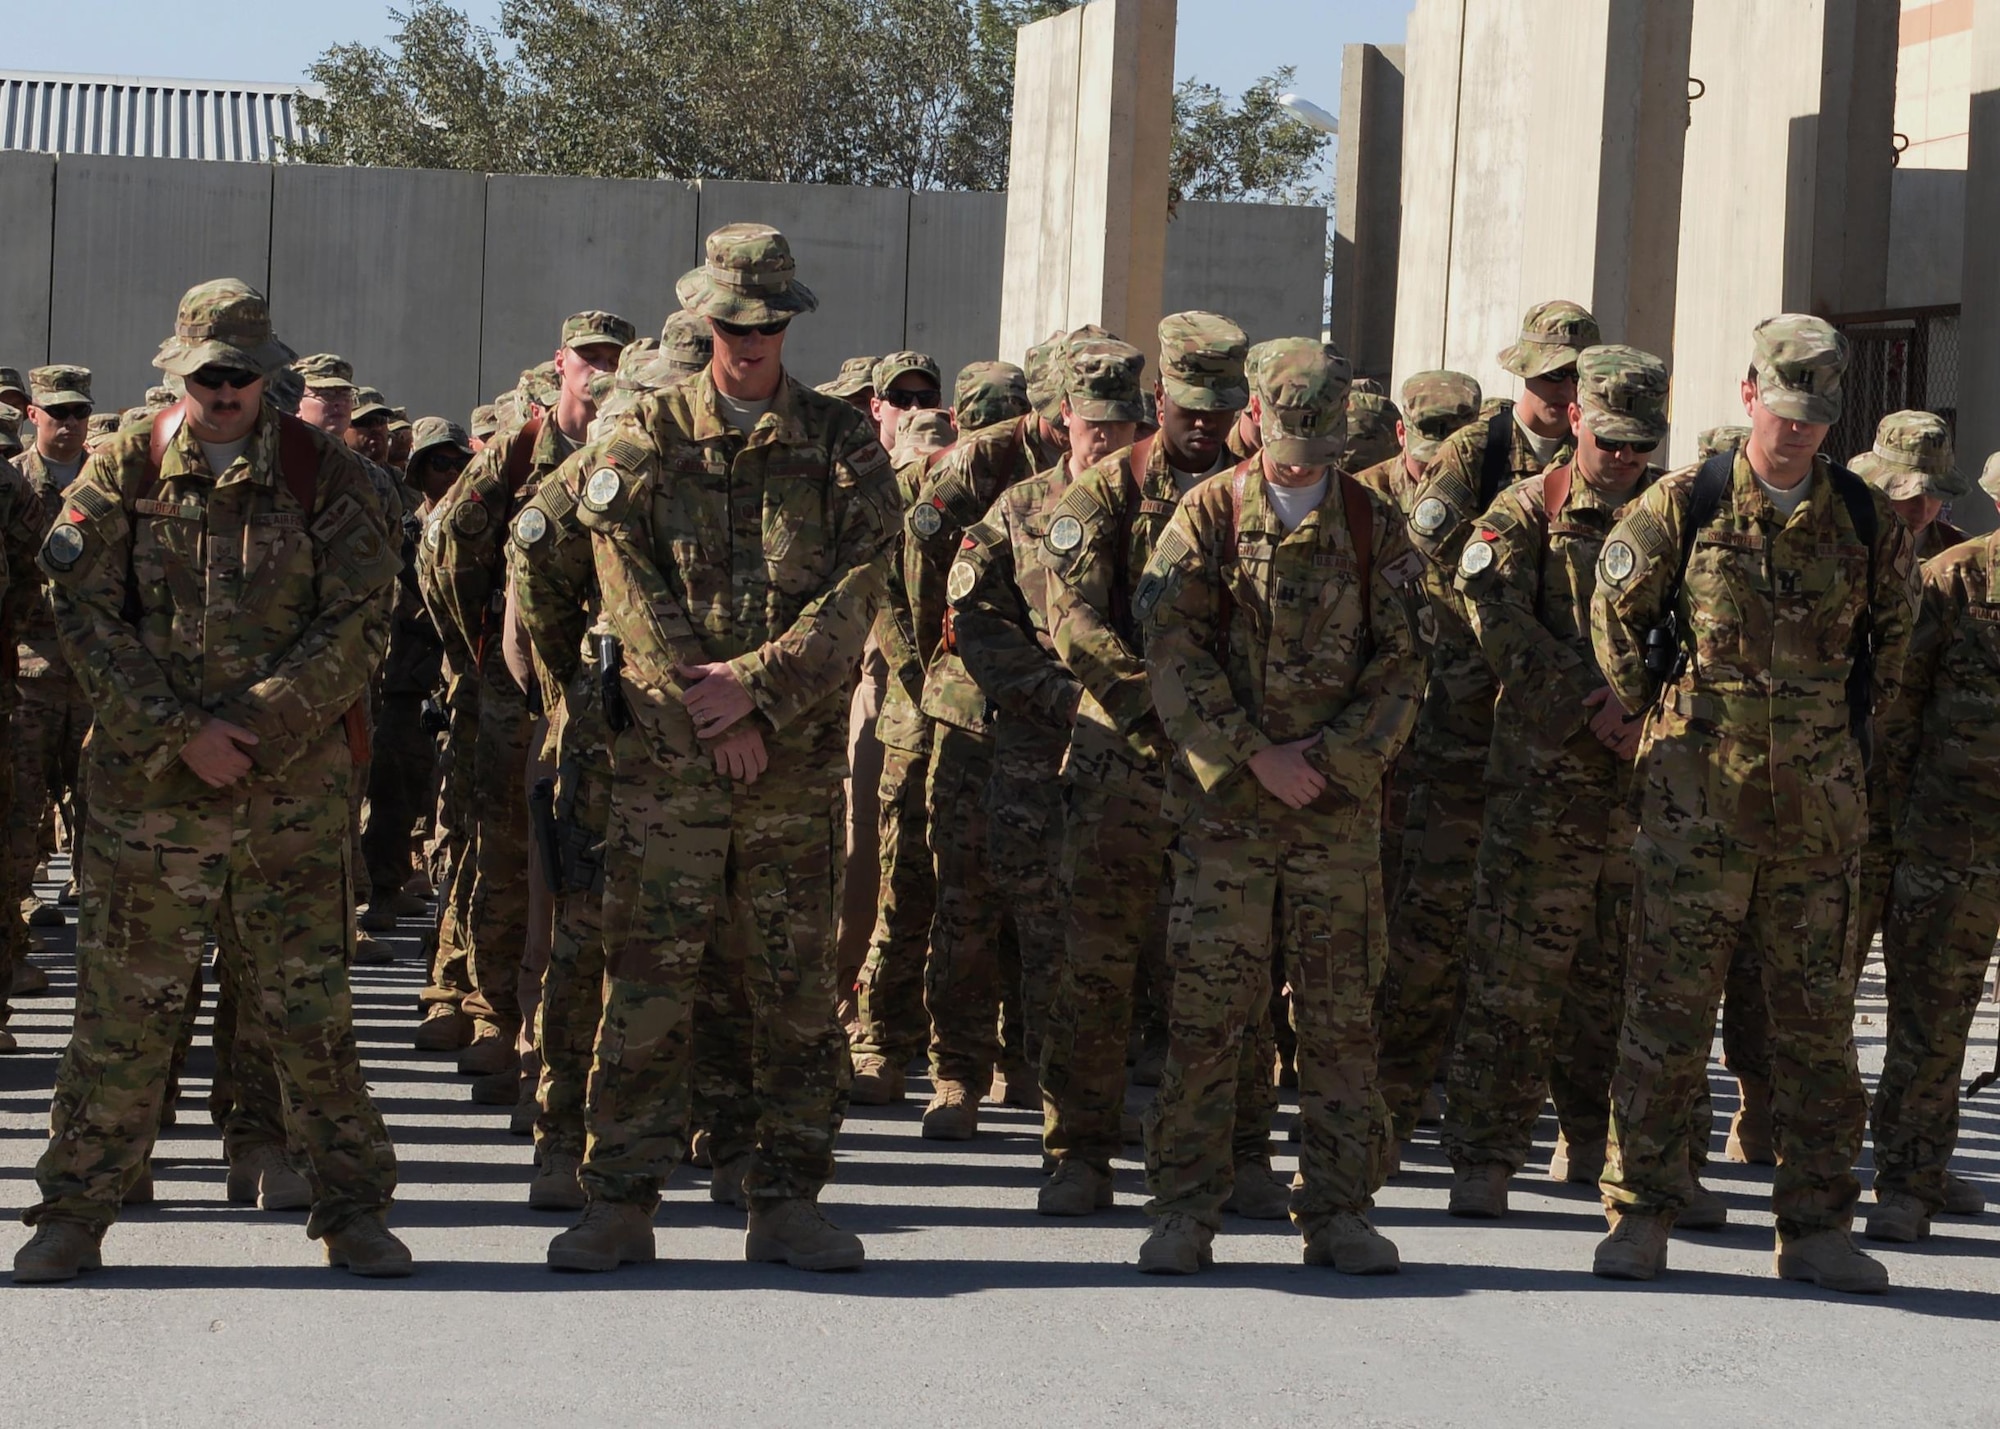 Airmen from the 774th Expeditionary Airlift Squadron gather at a fallen comrade memorial ceremony Oct. 3, 2015, at Bagram Airfield, Afghanistan. Six Airmen lost their lives when their C-130J Super Hercules crashed shortly after takeoff from Jalalabad Airfield in Afghanistan, Oct. 2, 2015. Capts. Jordan Pierson and Jonathan Golden, Staff Sgt. Ryan Hammond and Senior Airman Quinn Johnson-Harris were pilots and crew members. Airman 1st Class Kcey Ruiz and Senior Airman Nathan Sartain were security forces fly away security team members. (U.S. Air Force photo/Senior Airman Cierra Presentado) 